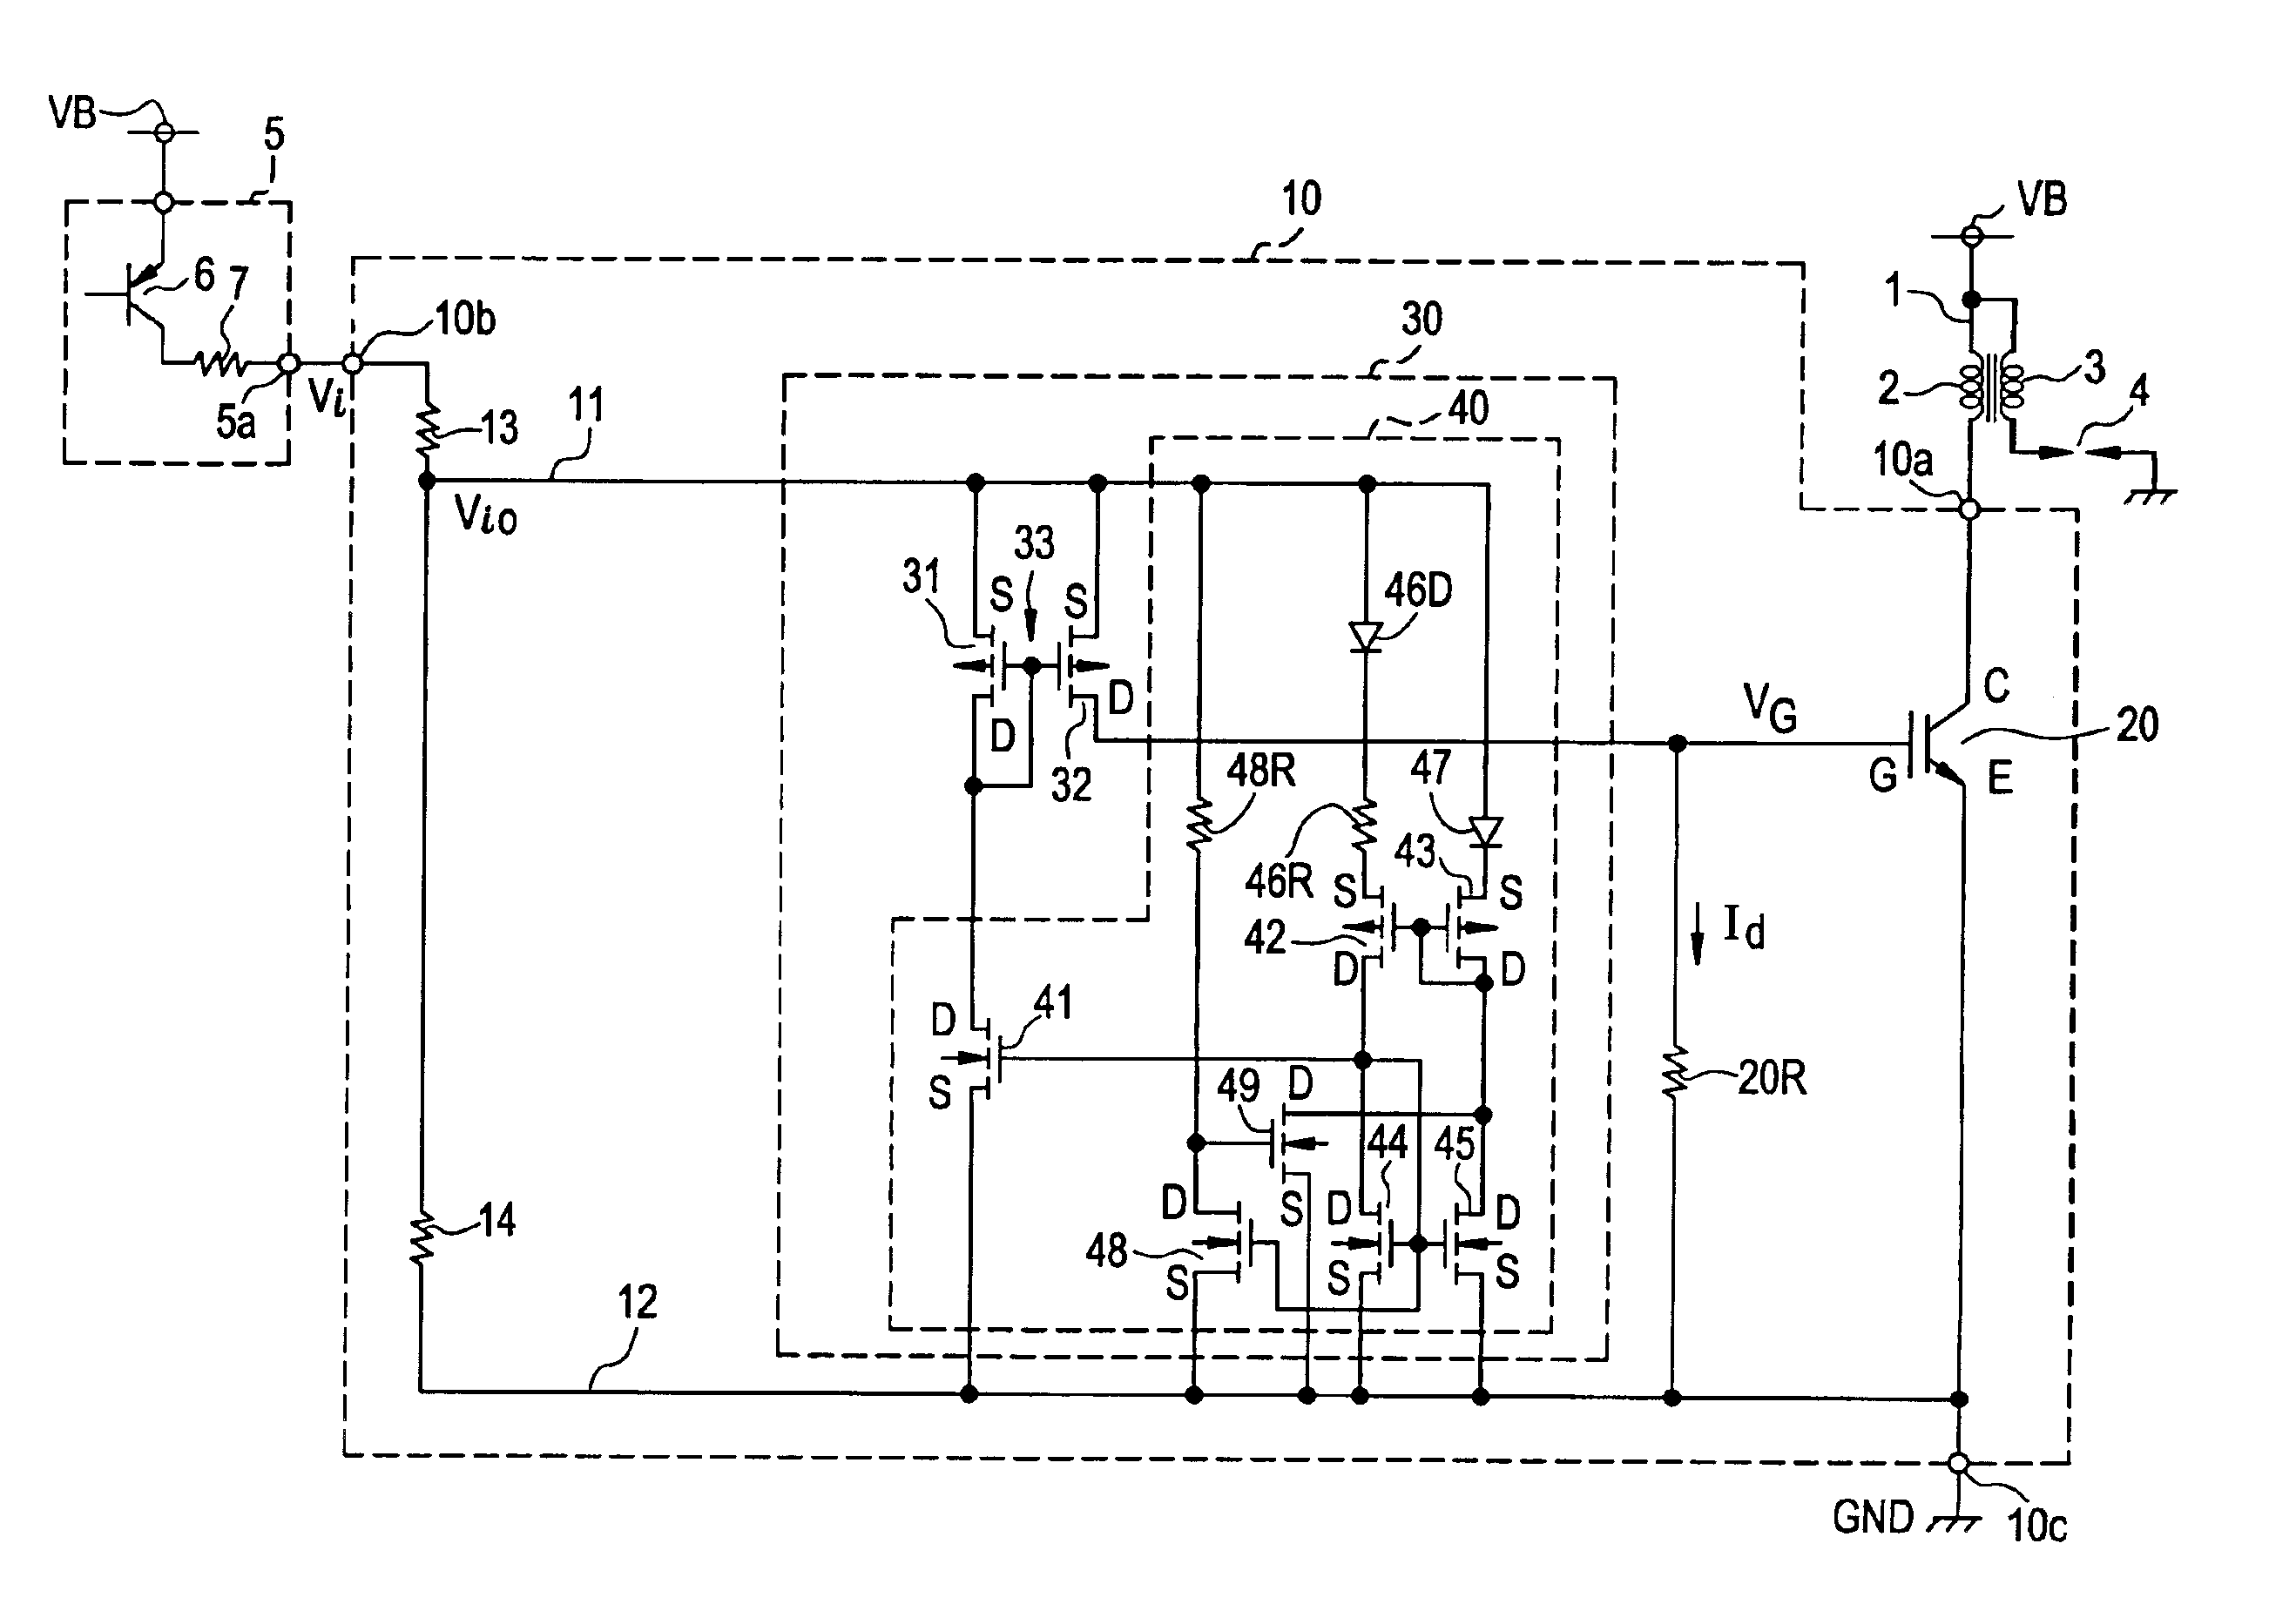 Internal combustion engine ignition apparatus